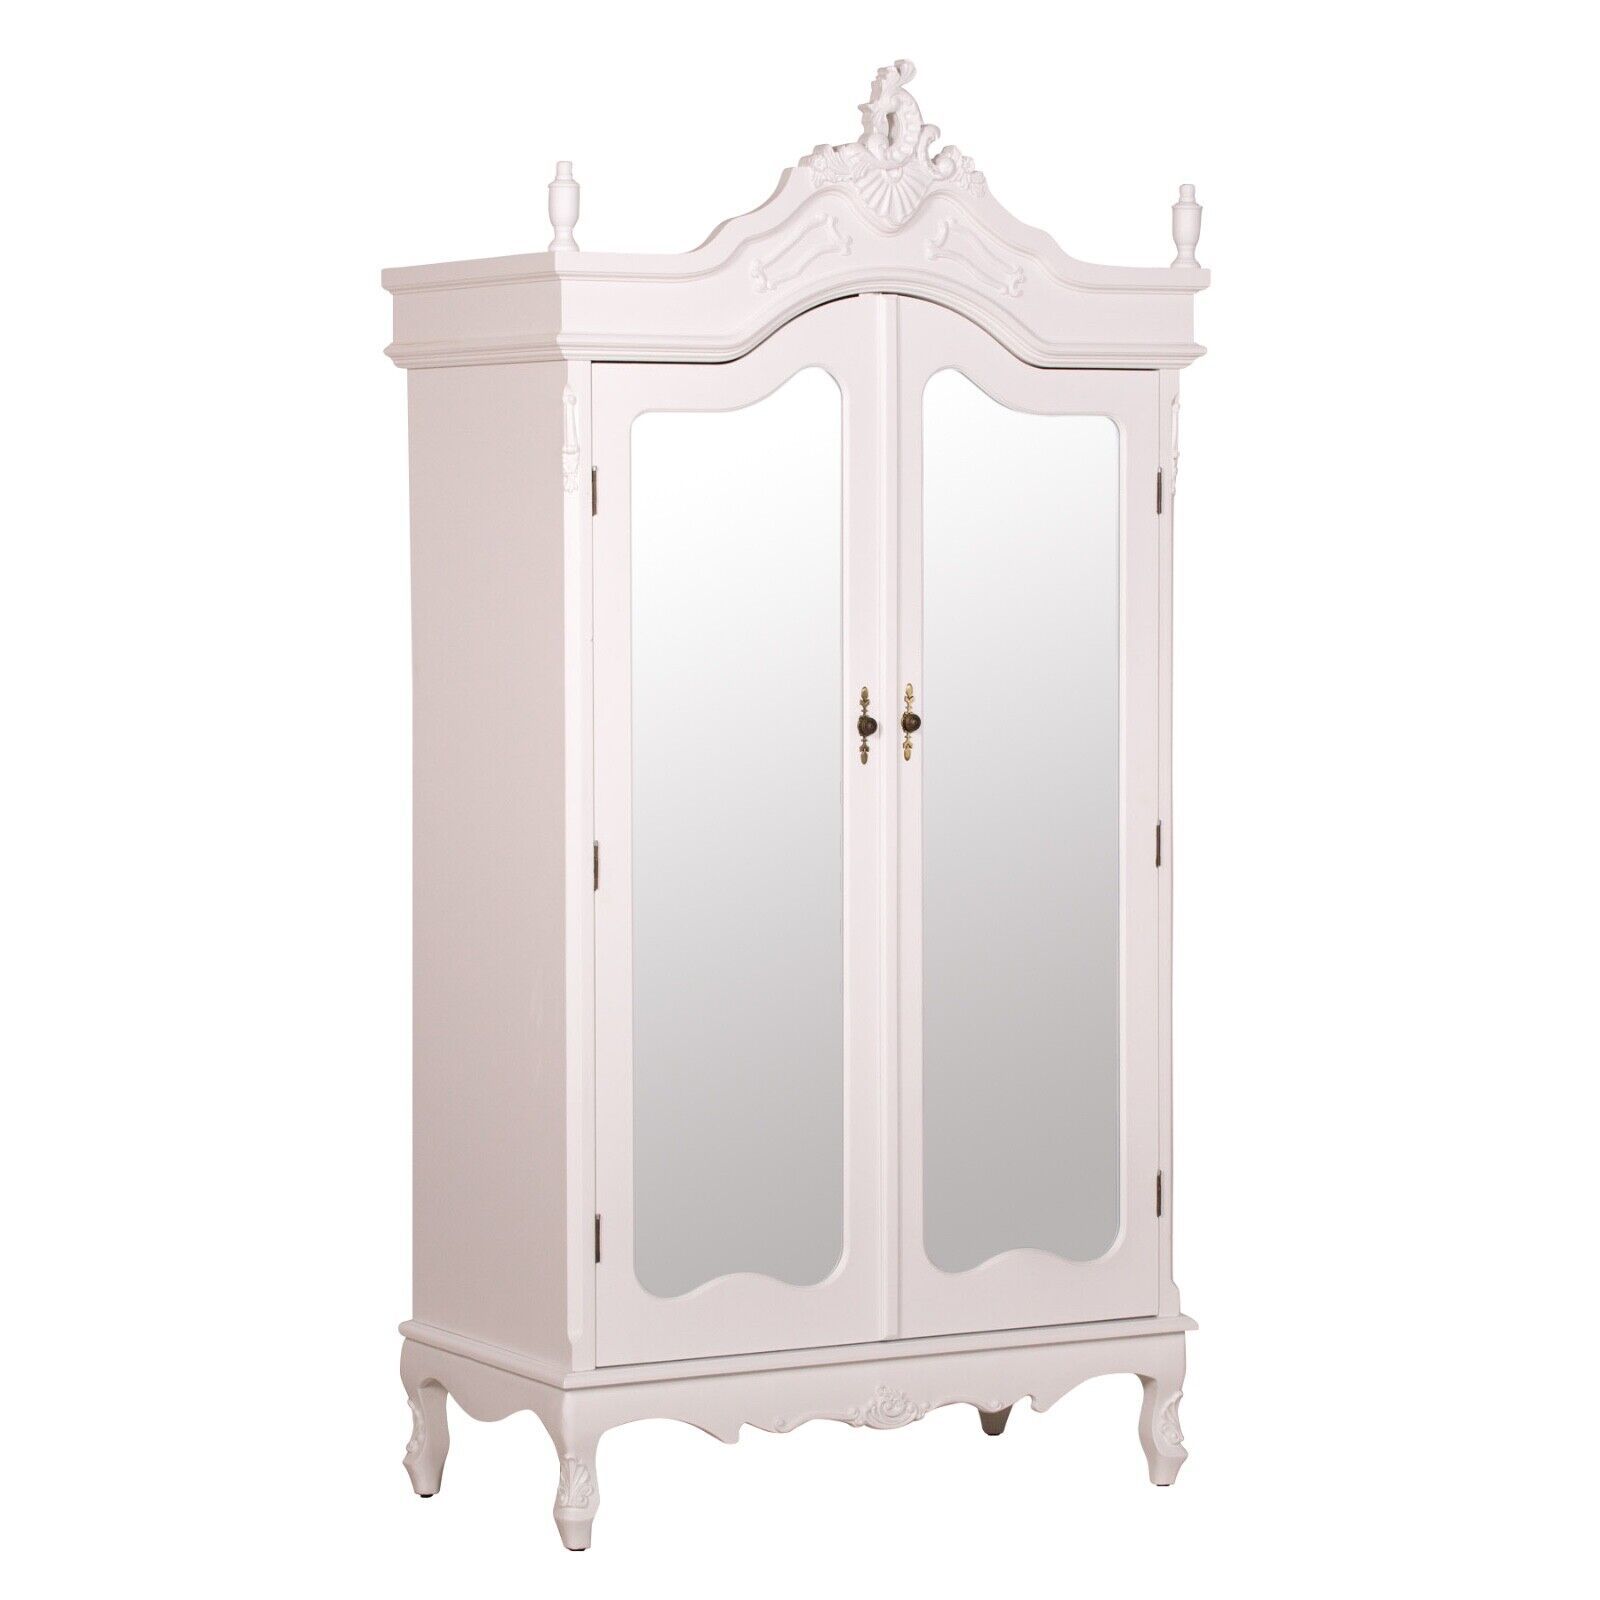 French Antique White Chateau Shabby Chic Mirrored Double Armoire Wardrobe |  Ebay Throughout Cheap Shabby Chic Wardrobes (View 5 of 15)